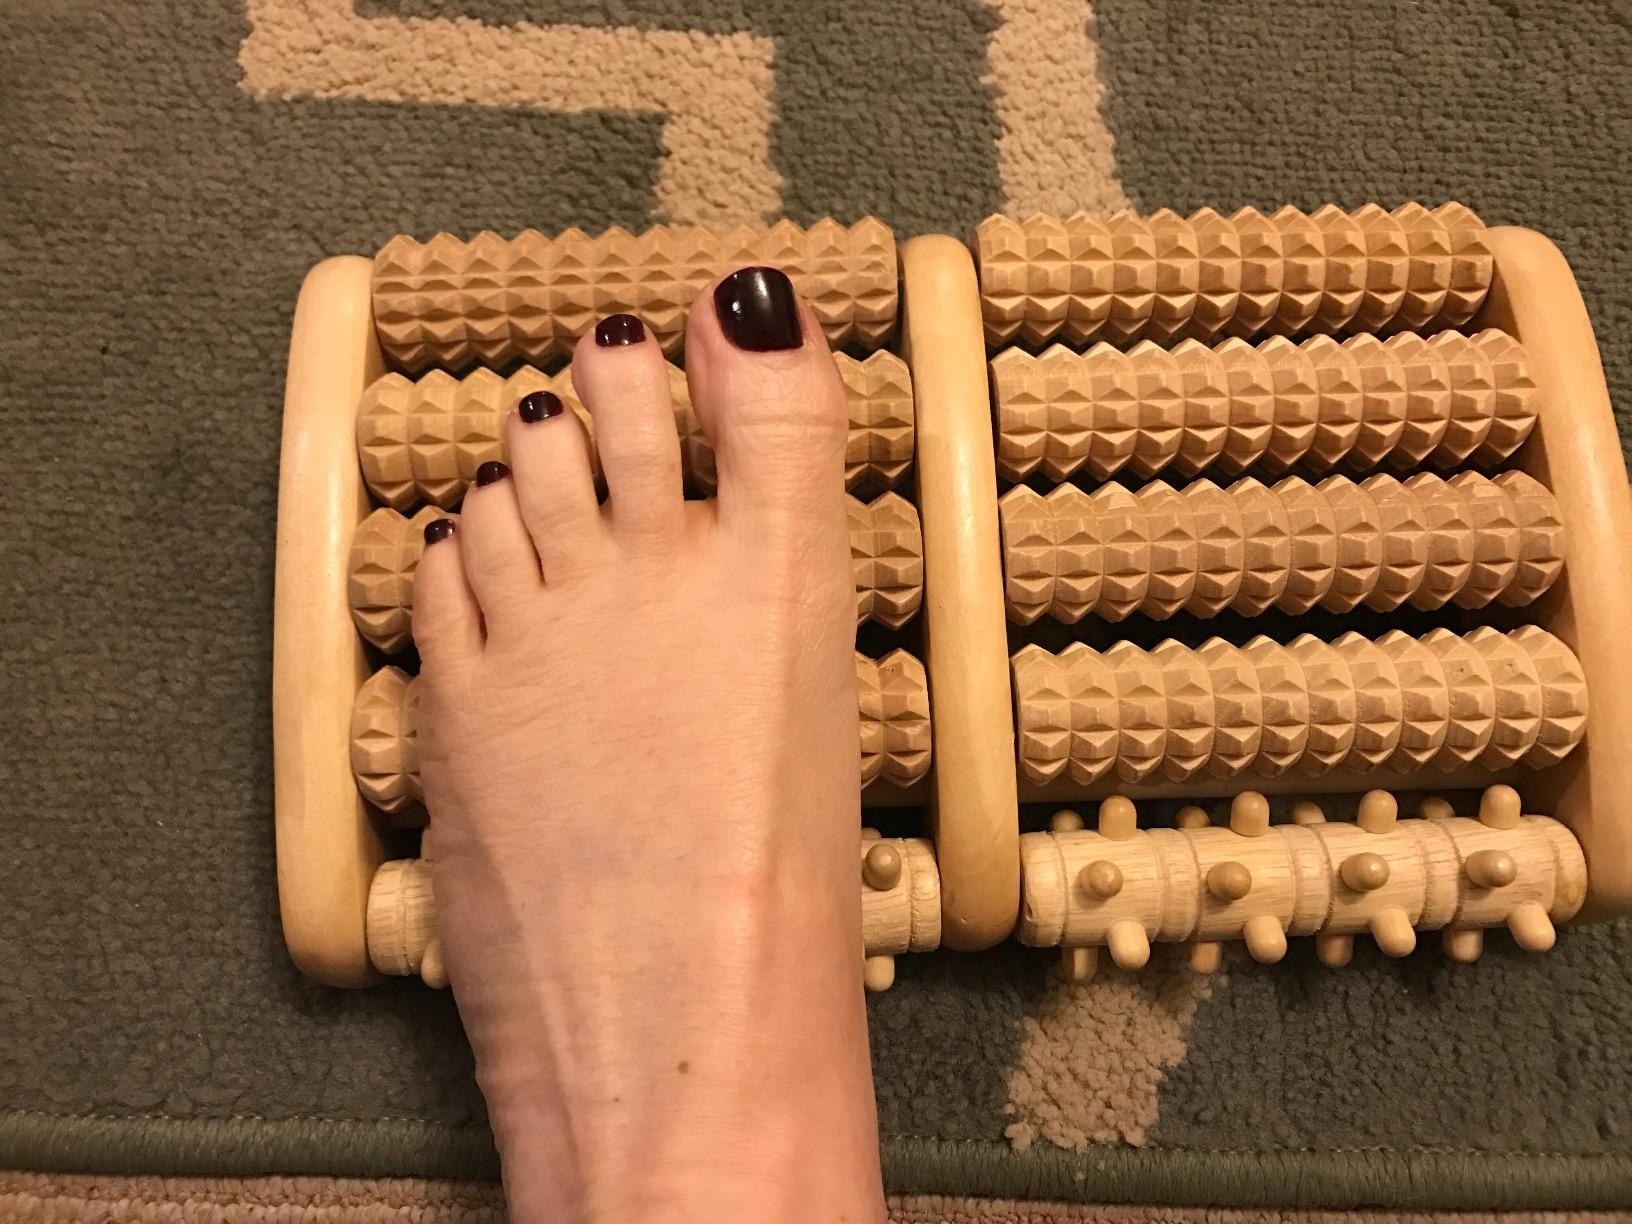 Reviewer image of their foot on the massager